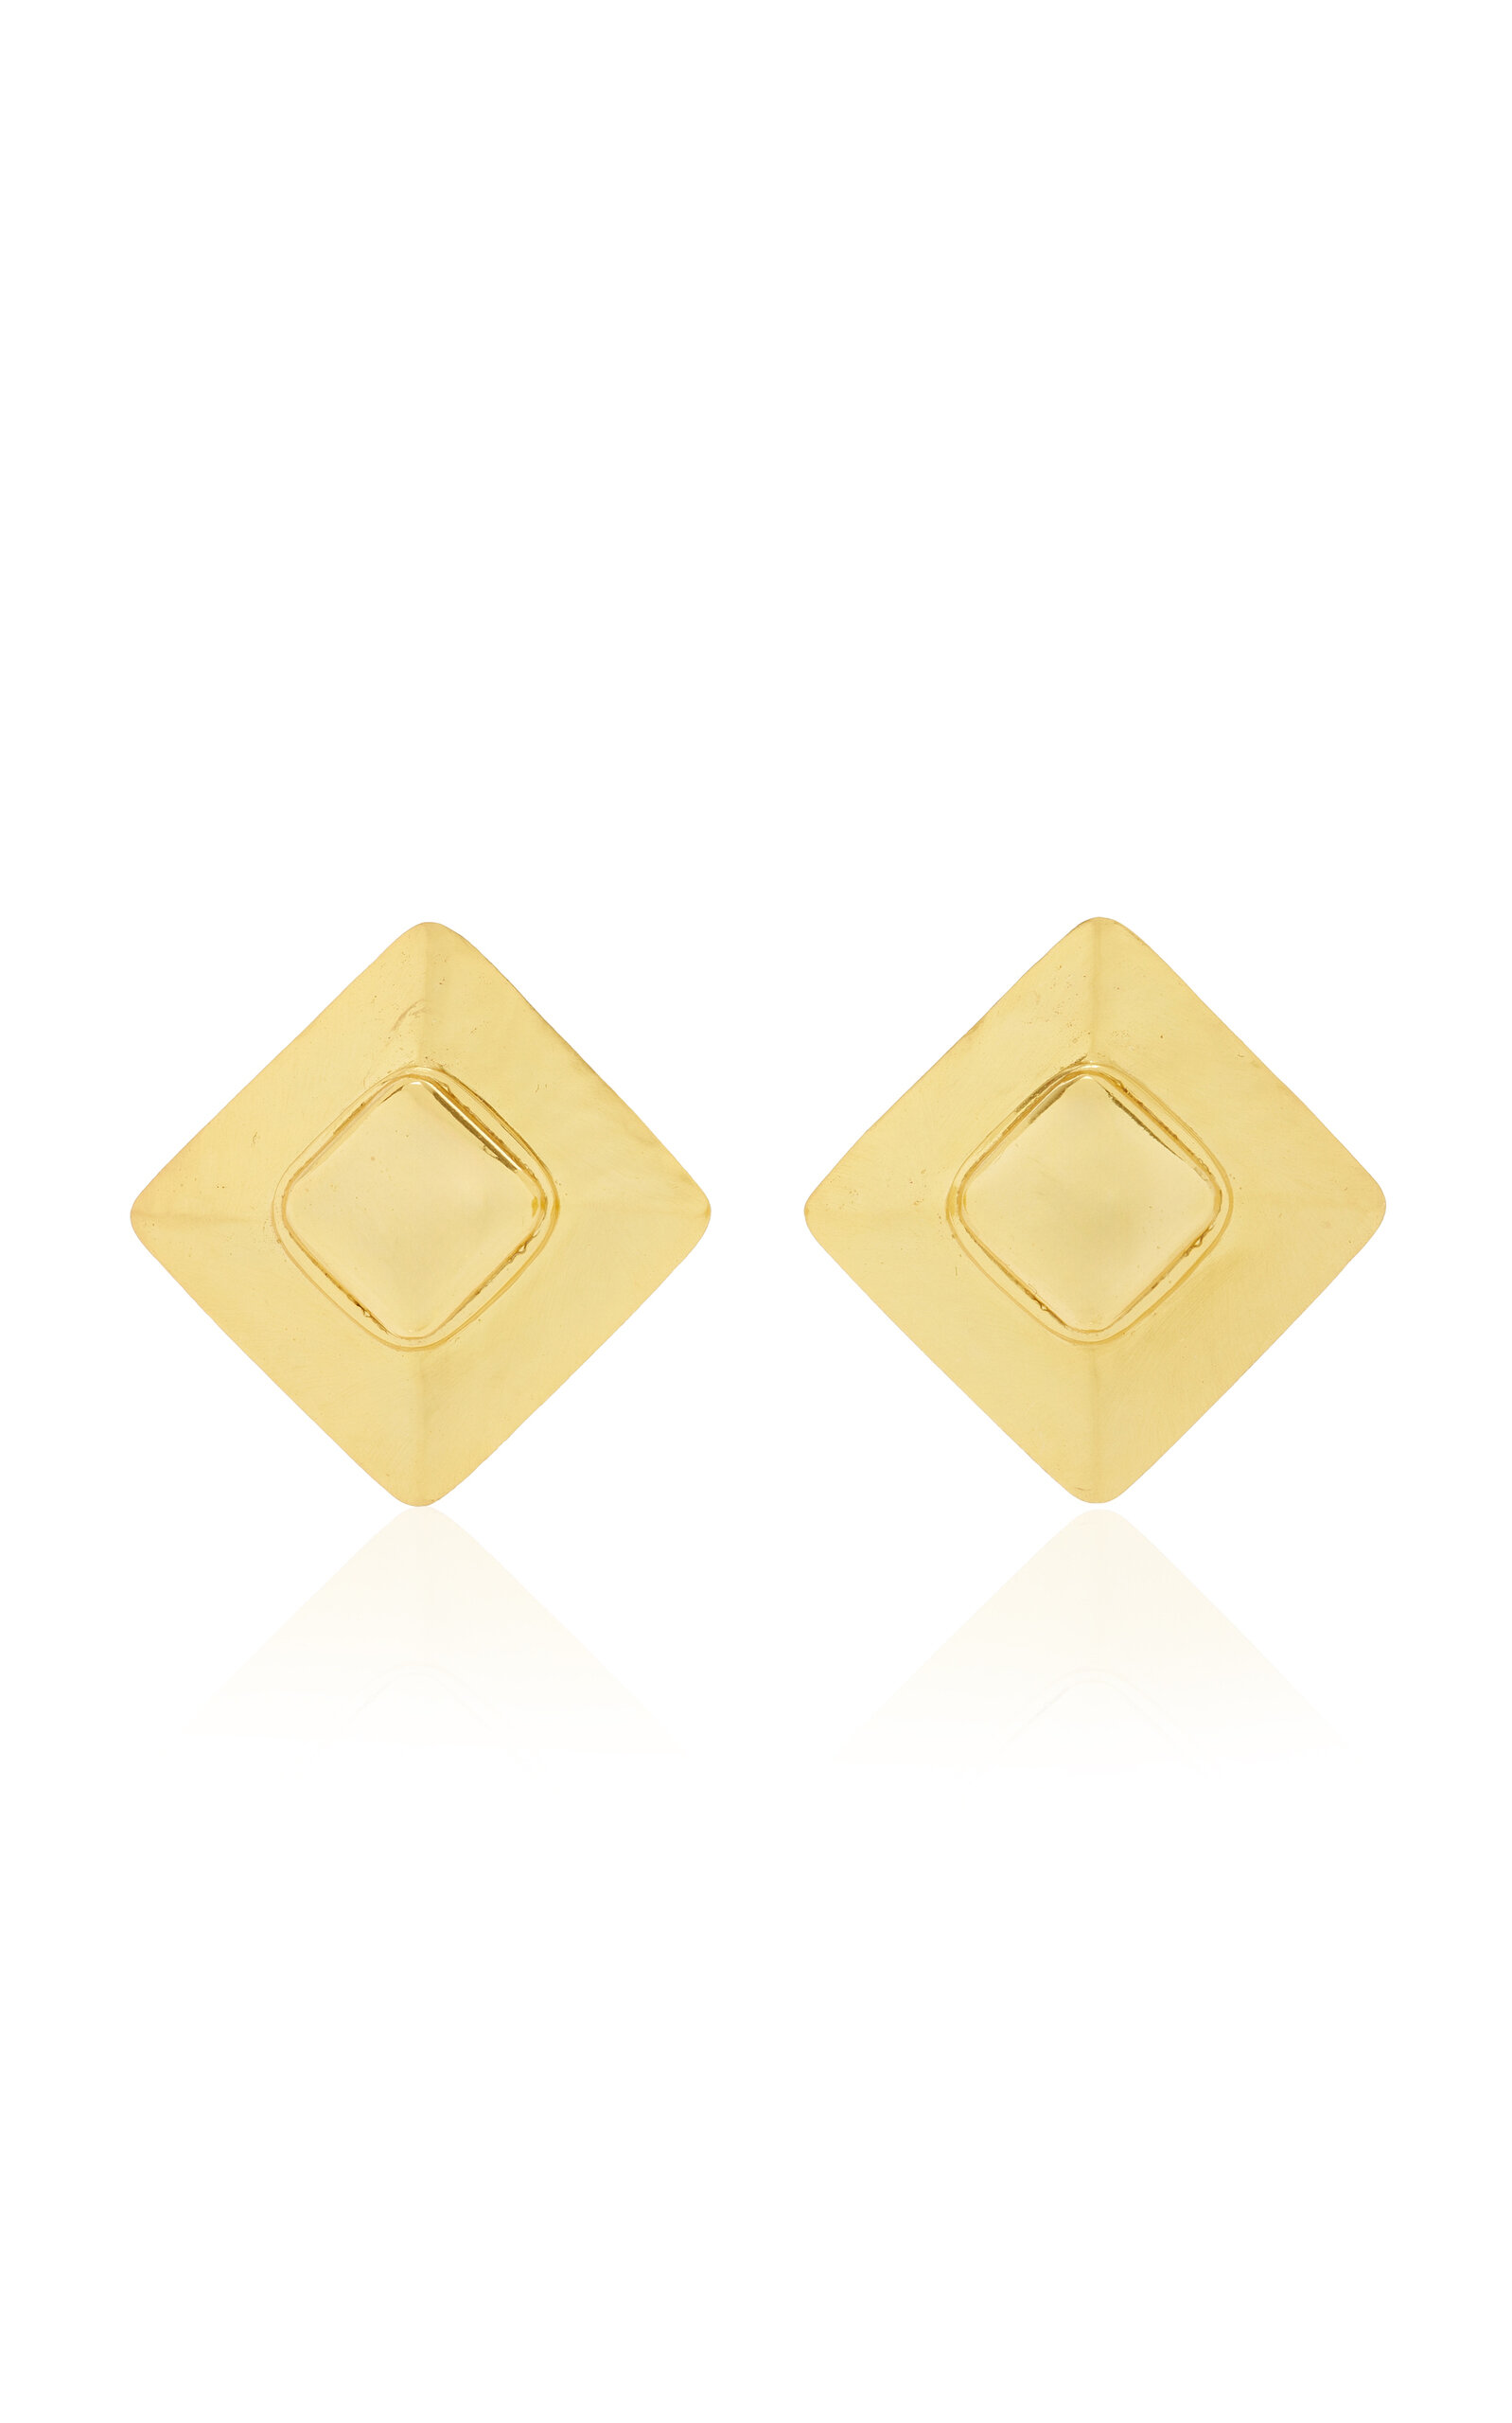 Valére Jas 24k Gold-plated Earrings